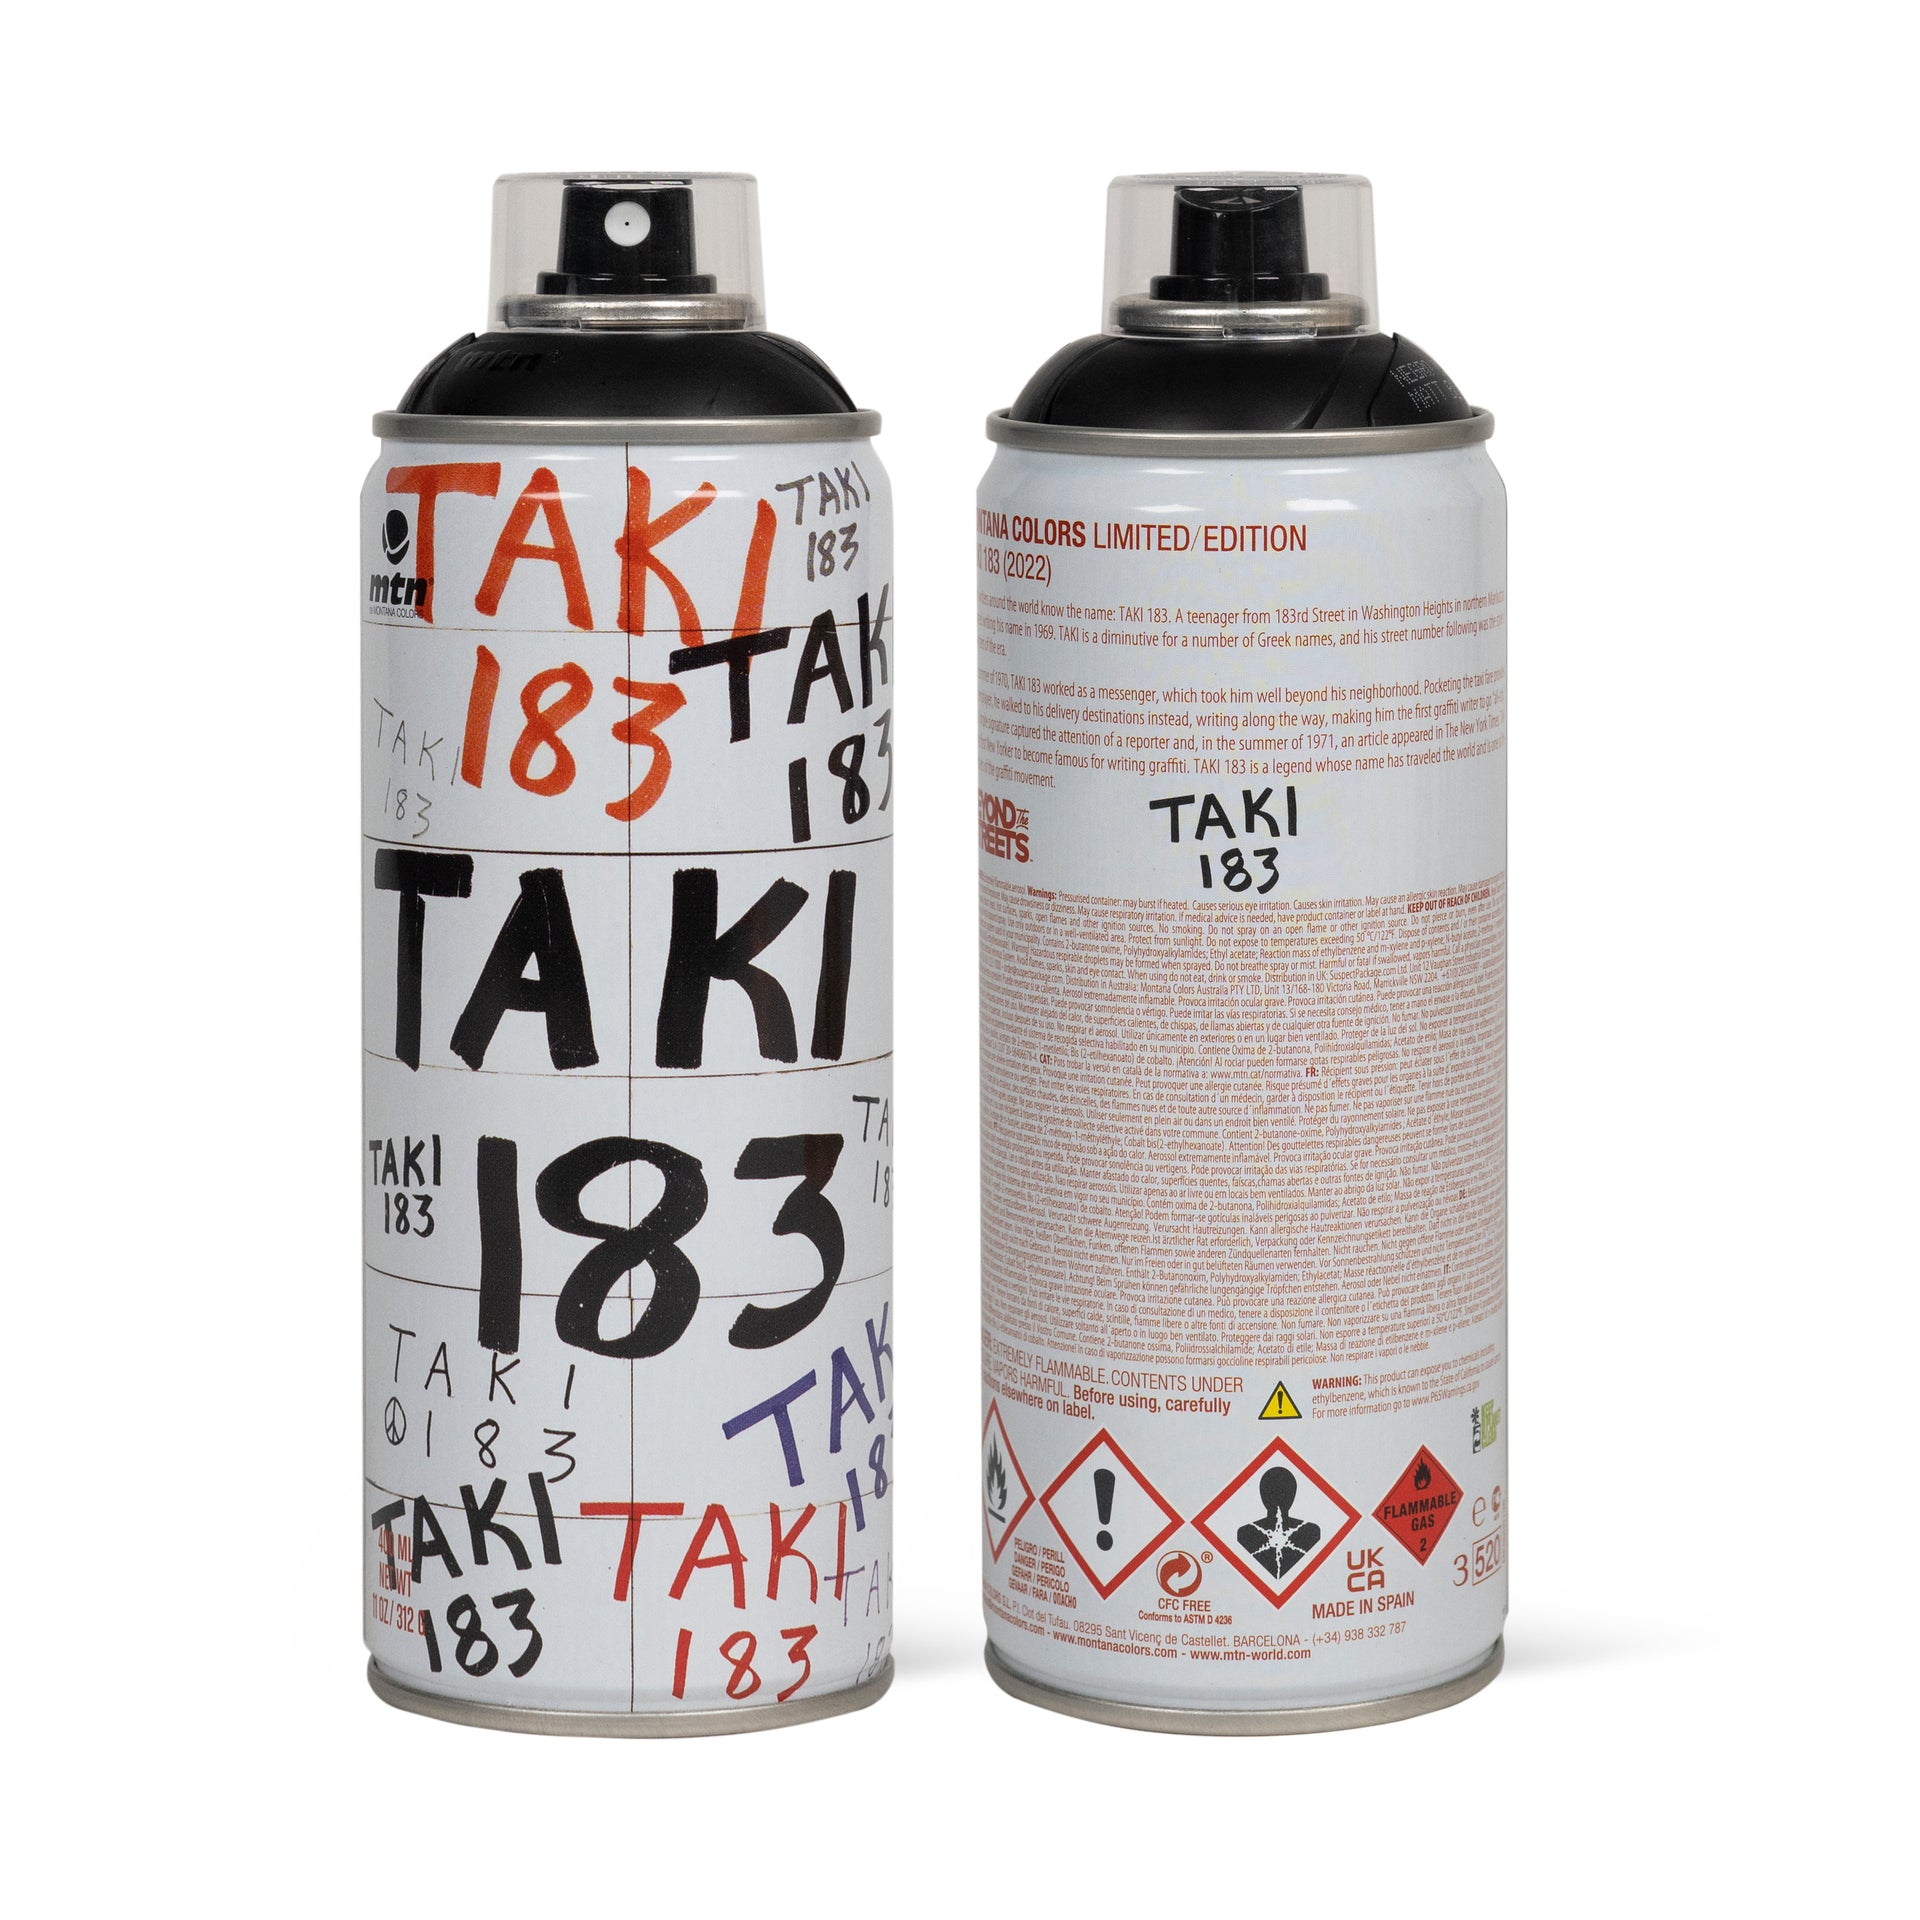 TAKI 183 "Limited Edition Spray Paint Can" - BEYOND THE STREETS